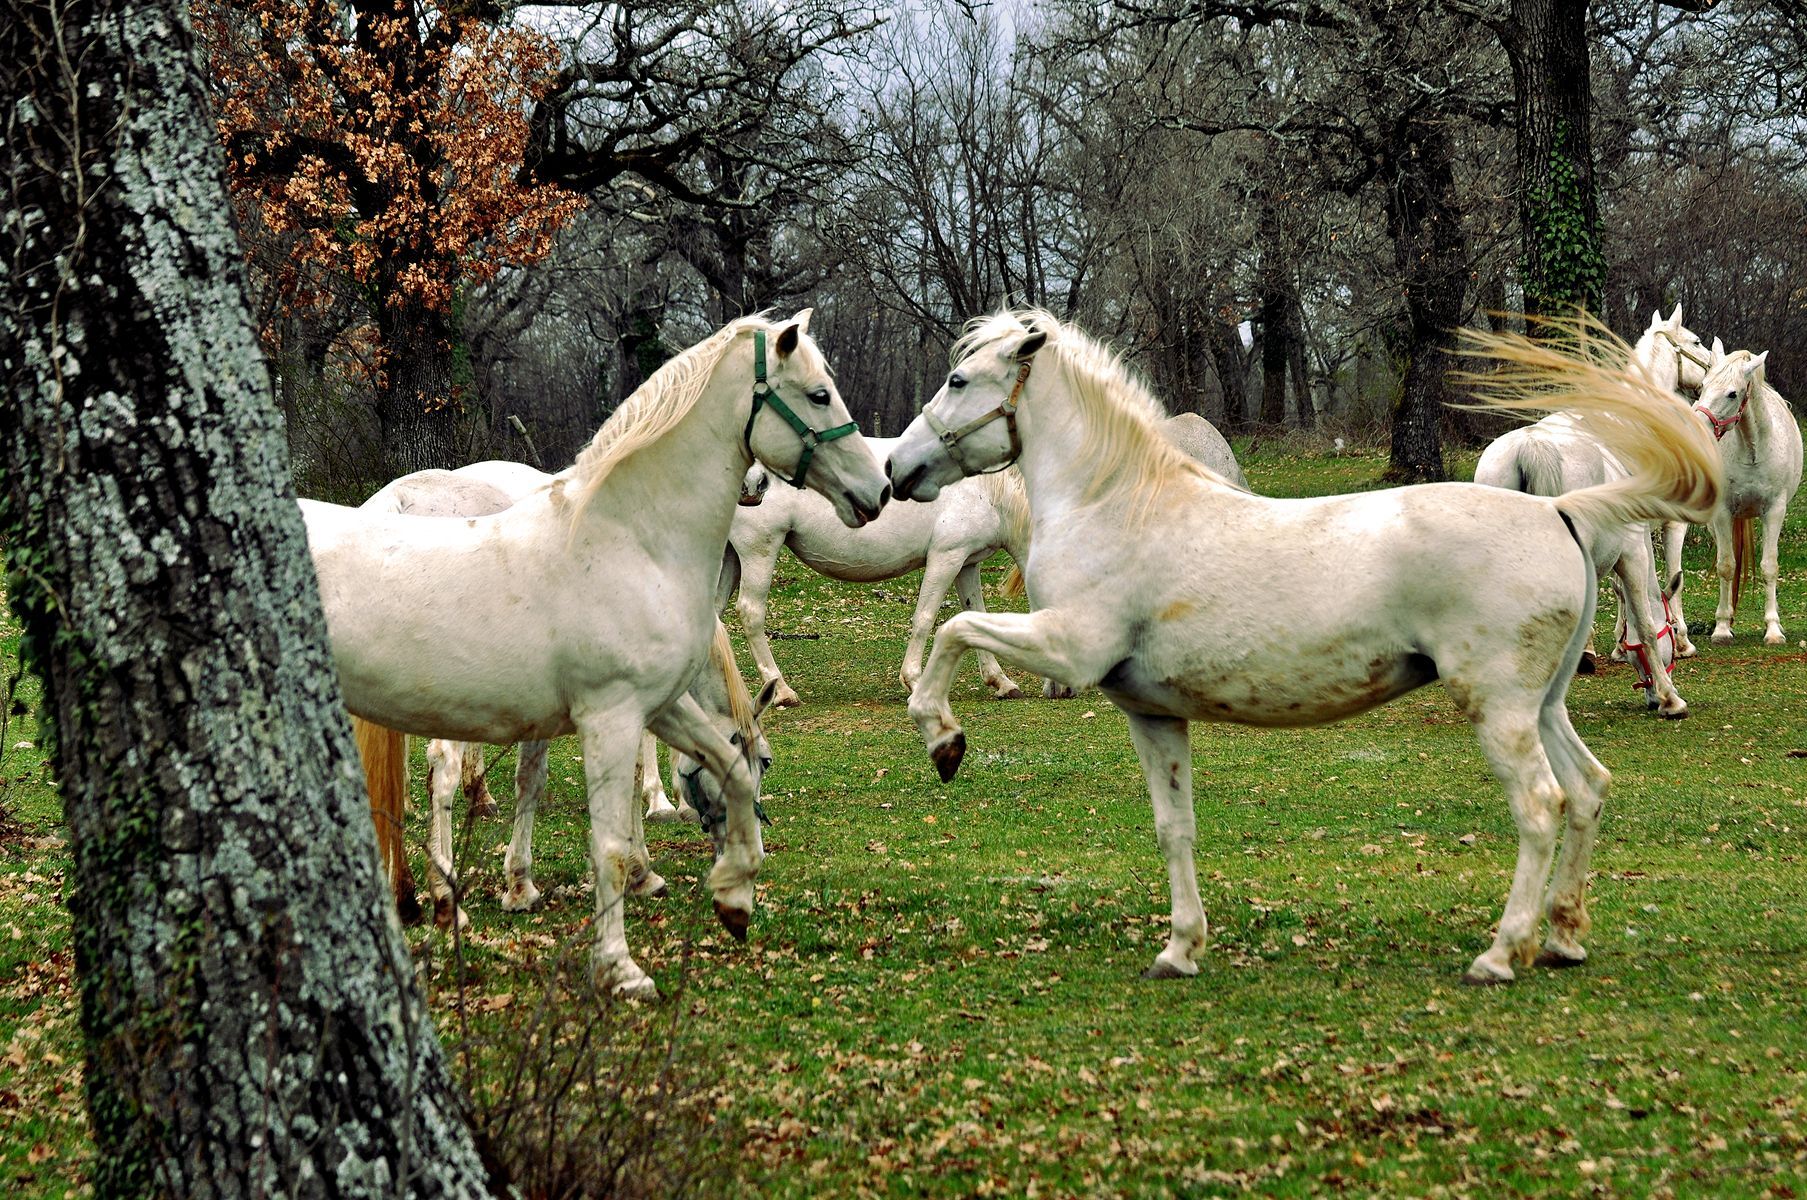 <p>Home of the prestigious Lipizzaner horse since the 16th century, <a href="https://www.slovenia.info/en/places-to-go/attractions/lipica">Lipica</a> is a fascinating destination for horse lovers. Located in southwest Slovenia, this picturesque region is known for its lush green landscapes and historic Lipizzaner stud farm, where visitors can admire the elegant white horses up close. Take a guided tour of the Lipica estate to learn more about the noble Lipizzaner breed, or sign up for horseback riding lessons or trail rides through the surrounding karst landscape.</p>